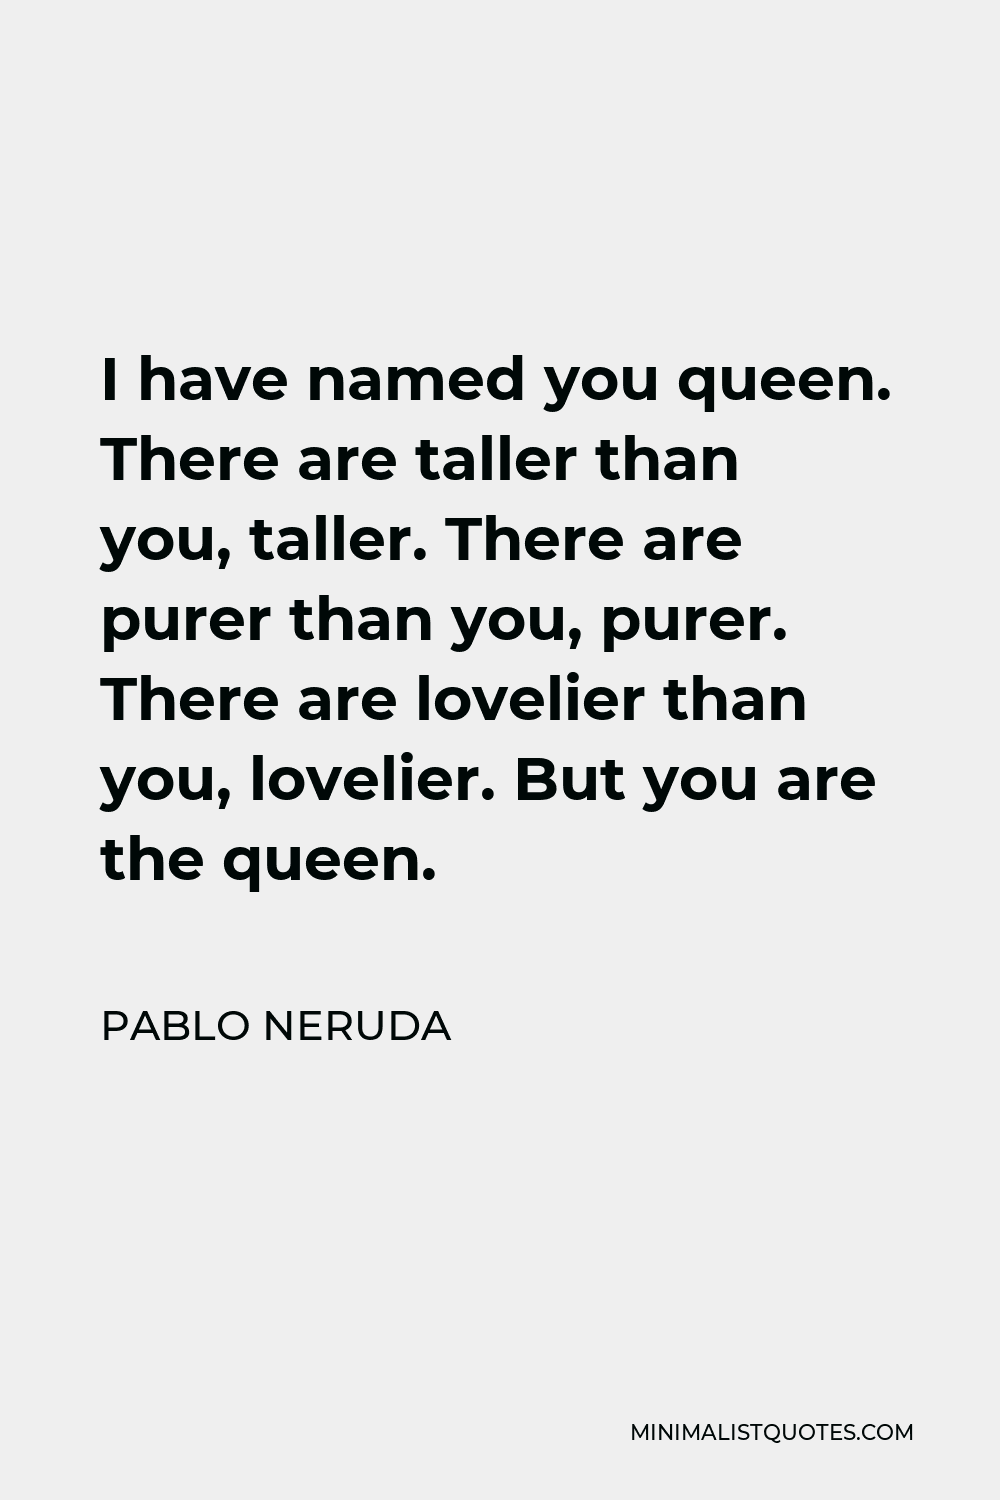 Pablo Neruda Quote - I have named you queen. There are taller than you, taller. There are purer than you, purer. There are lovelier than you, lovelier. But you are the queen.